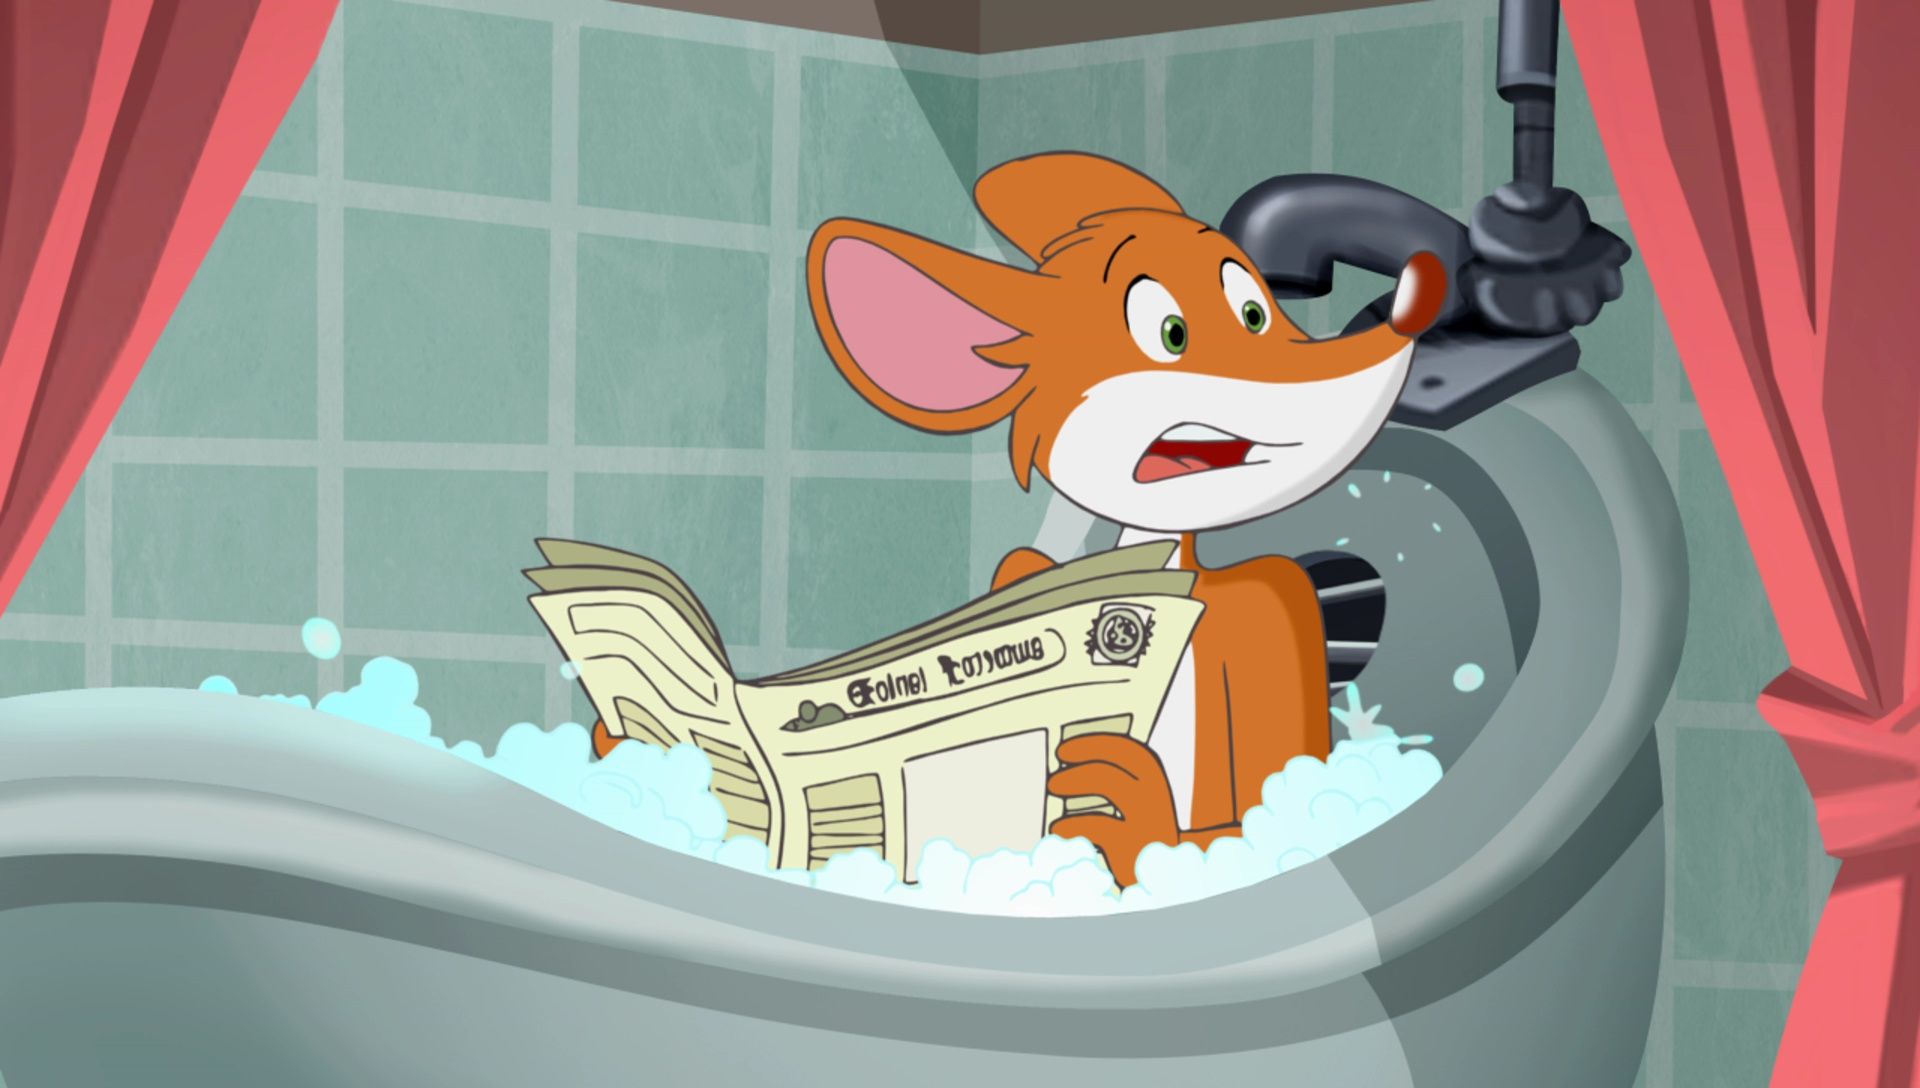 “Man, privacy is so hard for people to get nowadays! #geronimostilton” .